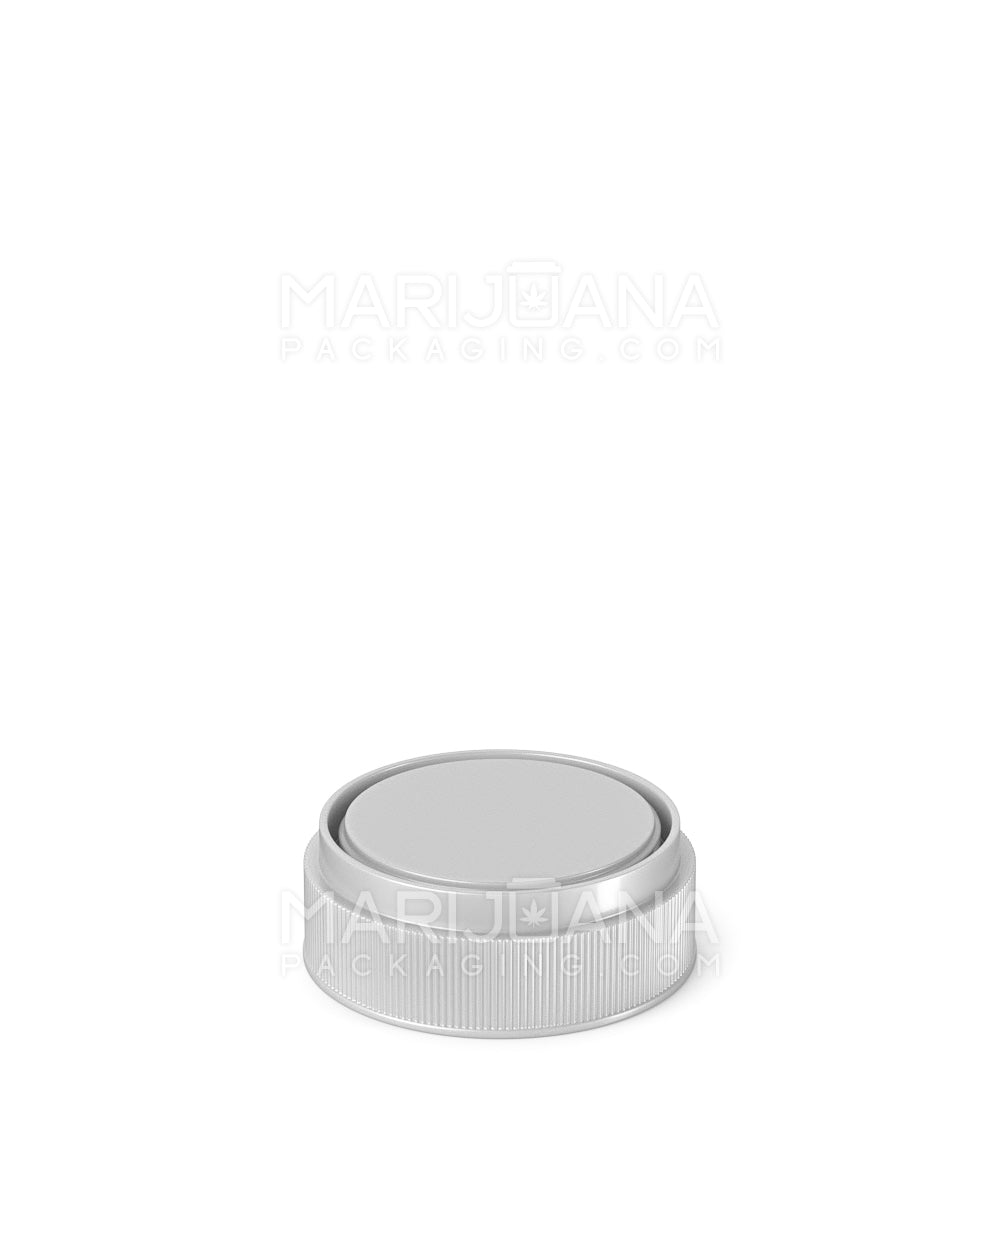 Child Resistant | Opaque Silver Blank Reversible Cap Vials | 20dr - 3.5g - 240 Count - 13